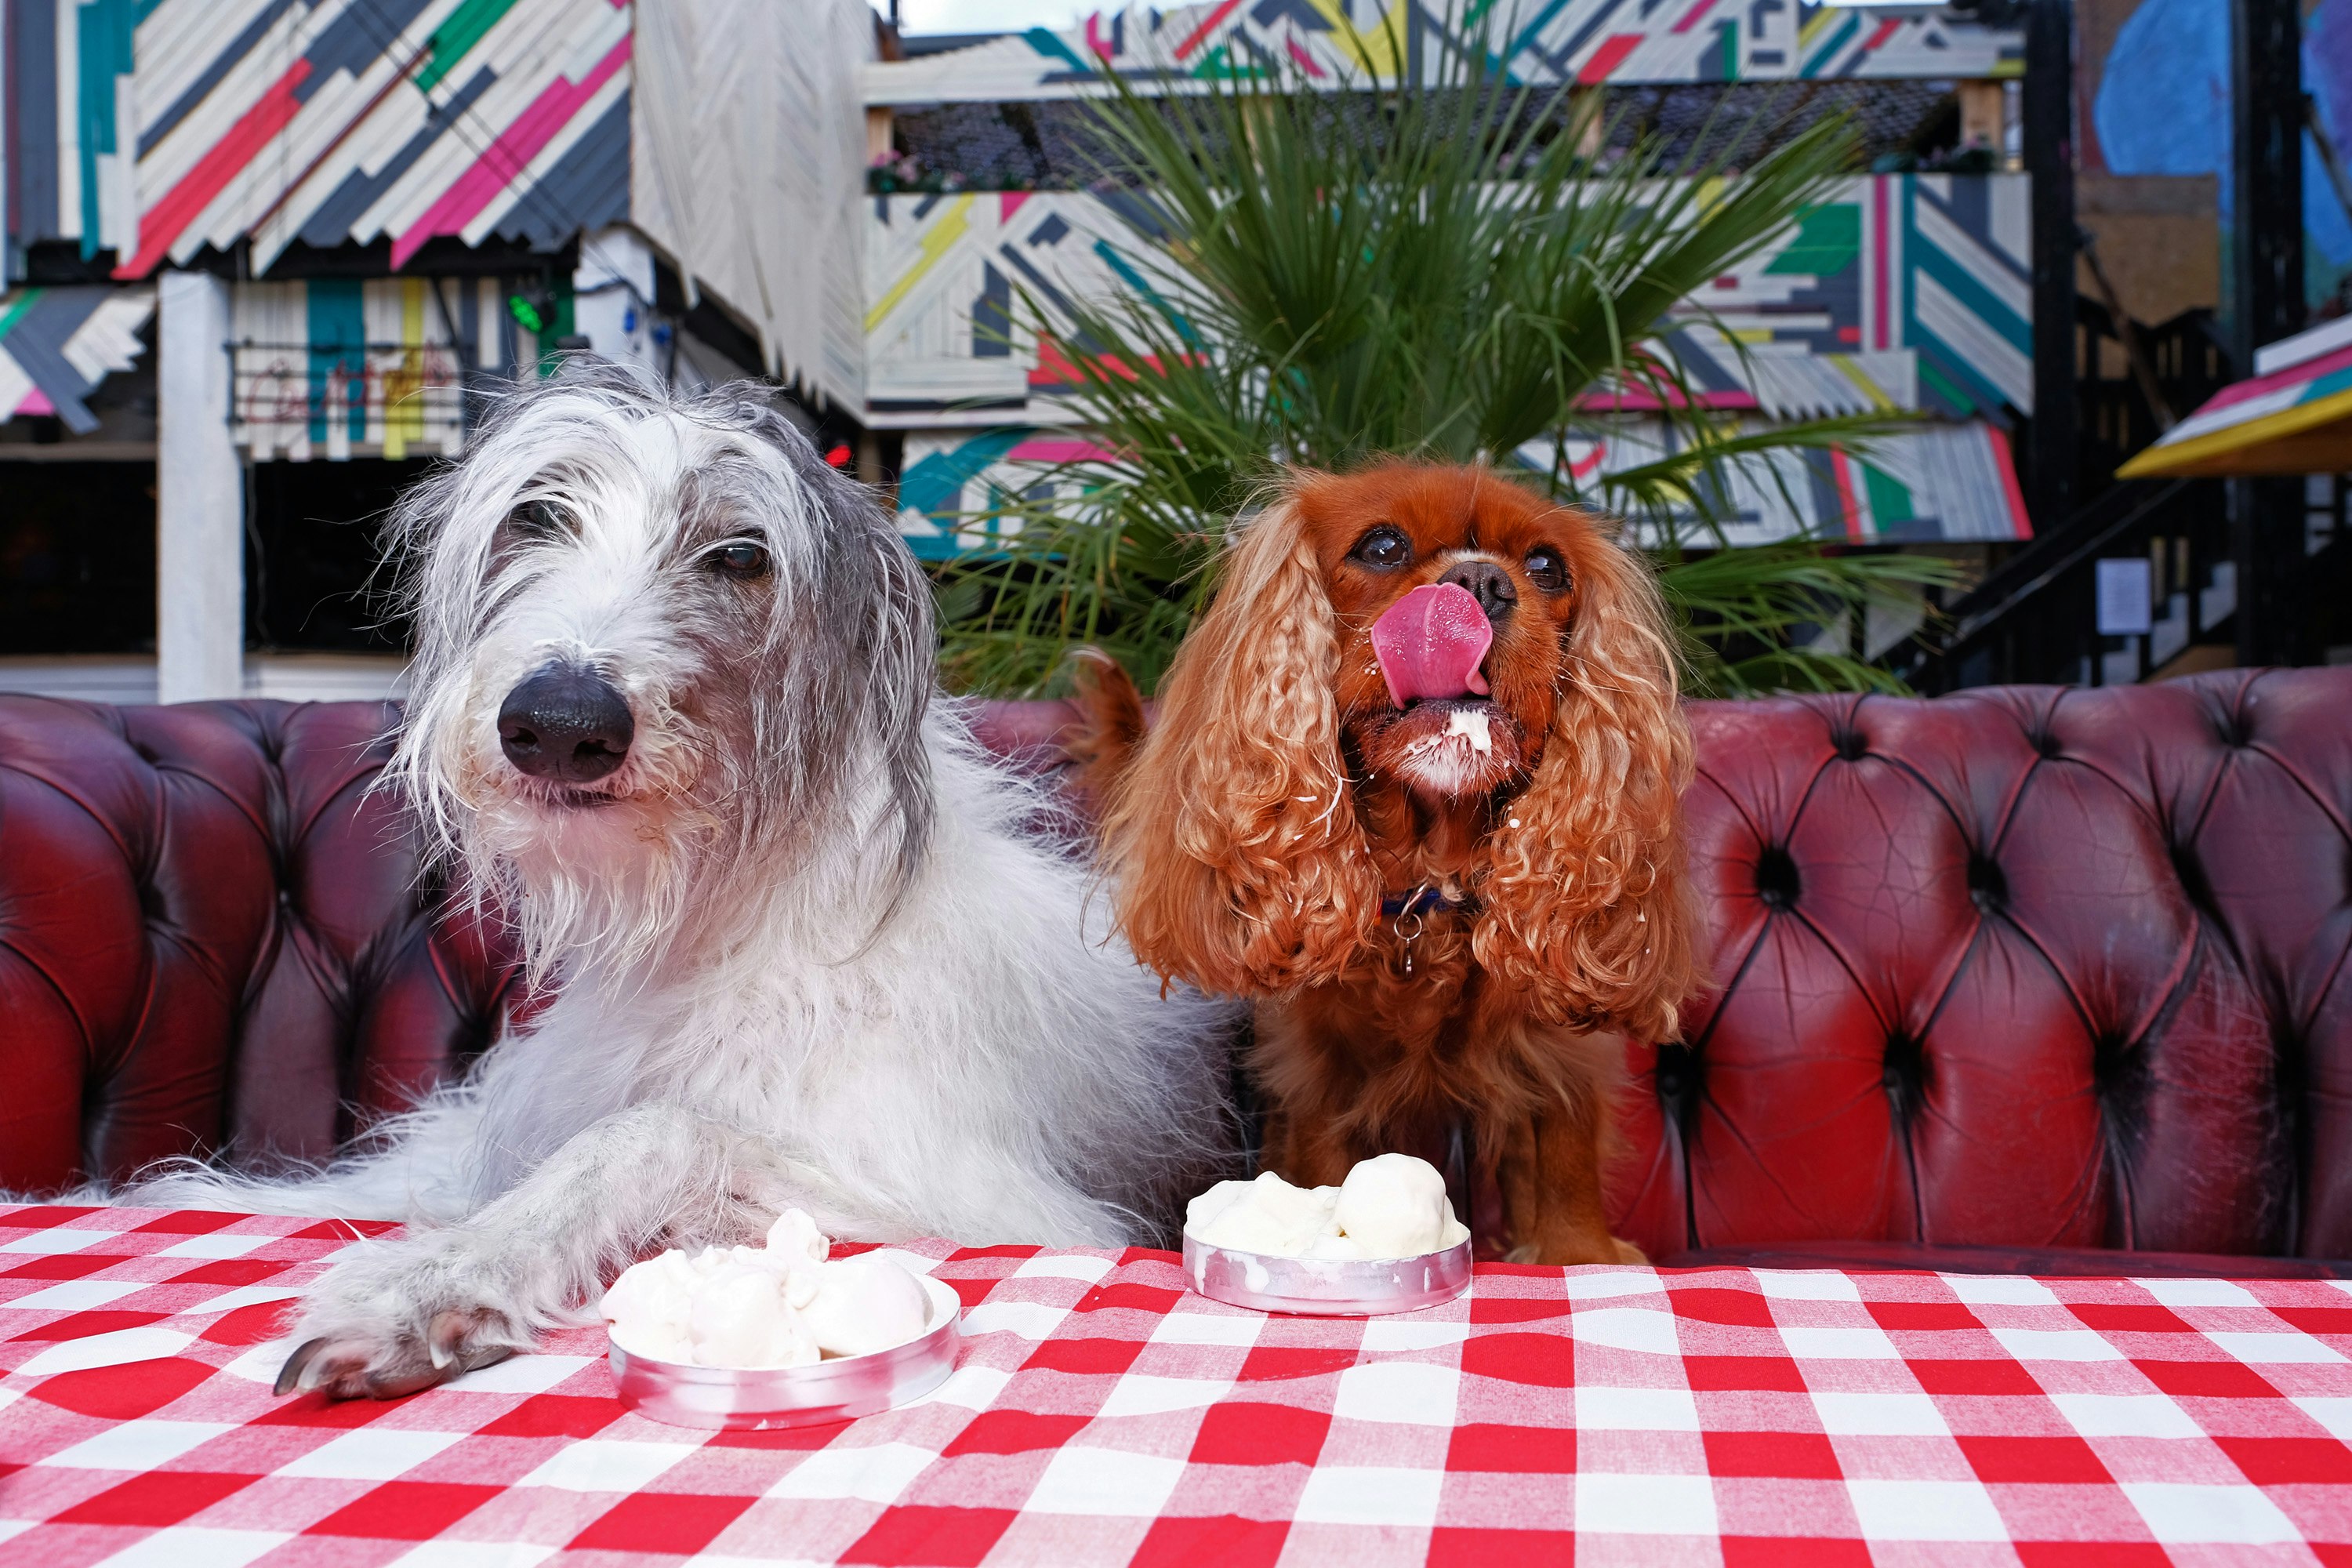 A white and gray wolfhound, and a chestnut-colored Cavalier King Charles spaniel sit  on a red Chesterfield sofa, with bowls of doggy ice-cream in front of them.